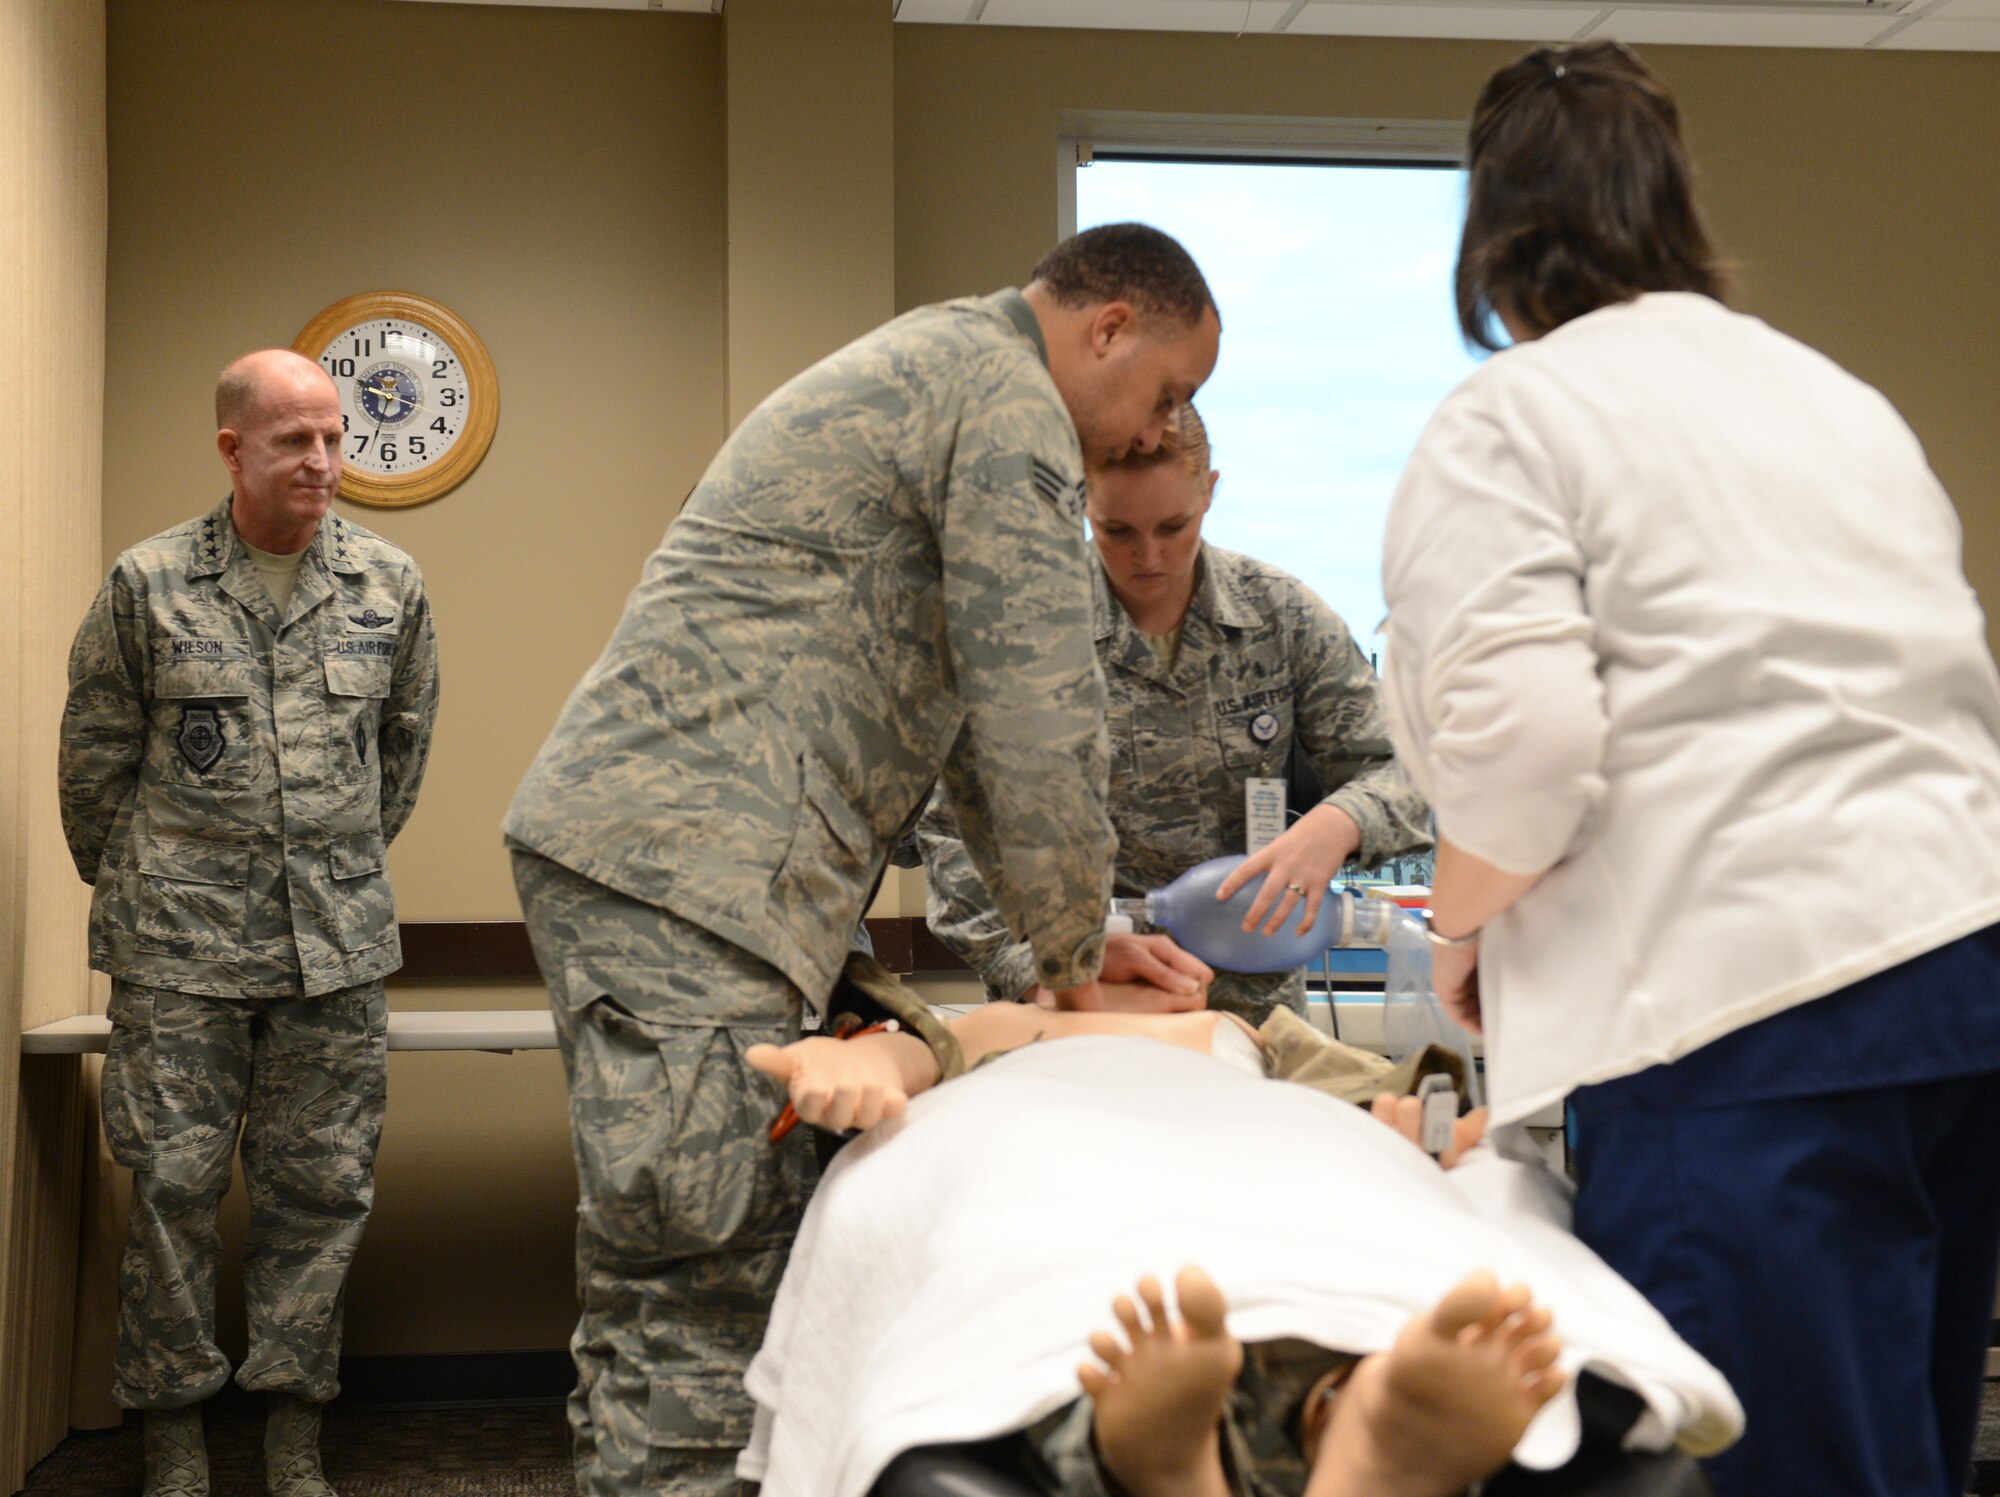 Airmen from the 2nd Medical Group provide Lt. Gen. Stephen Wilson, commander of Air Force Global Strike Command, a cardiopulmonary resuscitation demonstration during a visit to the 2nd Bomb Wing on Barksdale Air Force Base, La., Dec. 17., 2014.  For training purposes, the 2nd MDG uses dummies to simulate medical emergencies. (U.S. Air Force photo/Senior Airman Benjamin Gonsier)